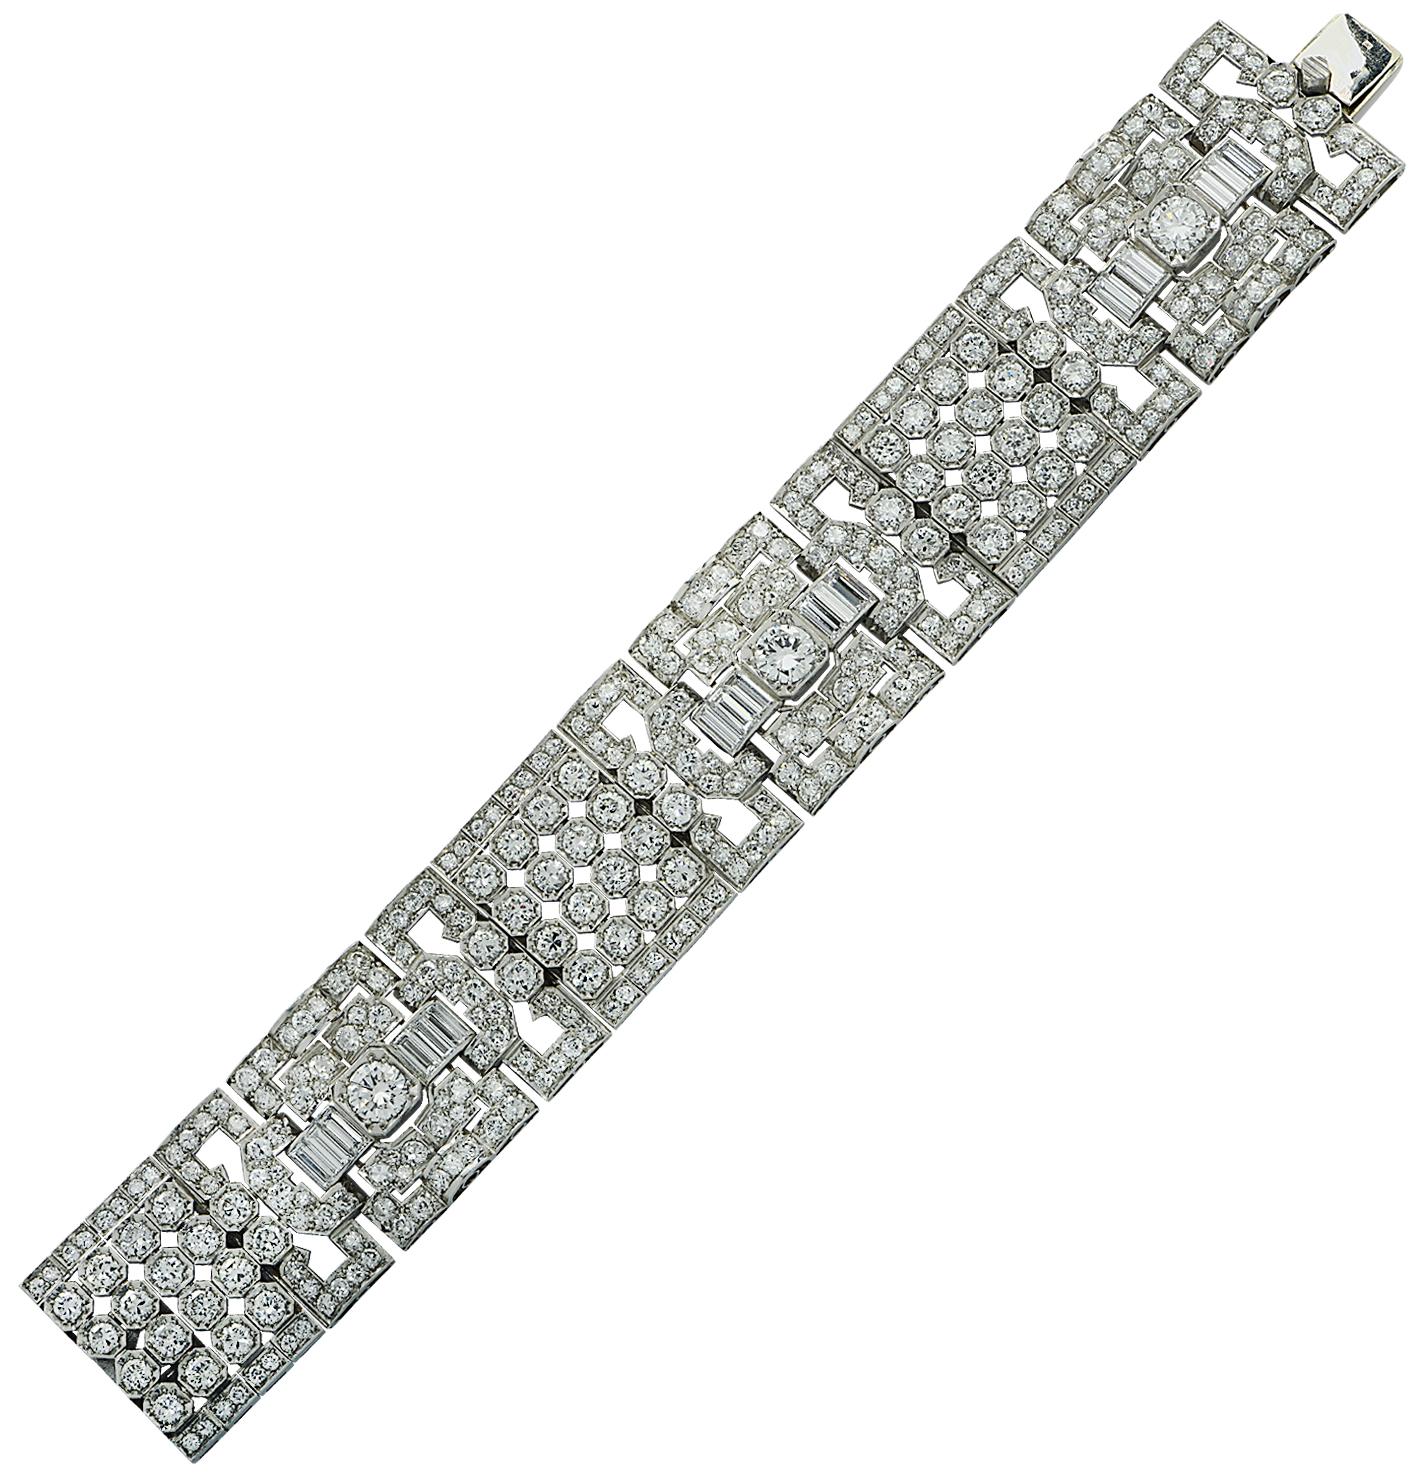 Exquisite Art Deco bangle bracelet crafted in platinum featuring Old European Cut and Baguette Cut diamonds weighing approximately 30 carats total, H color, VS-SI clarity. This gorgeous open metal bracelet features ornate motifs showcasing a center